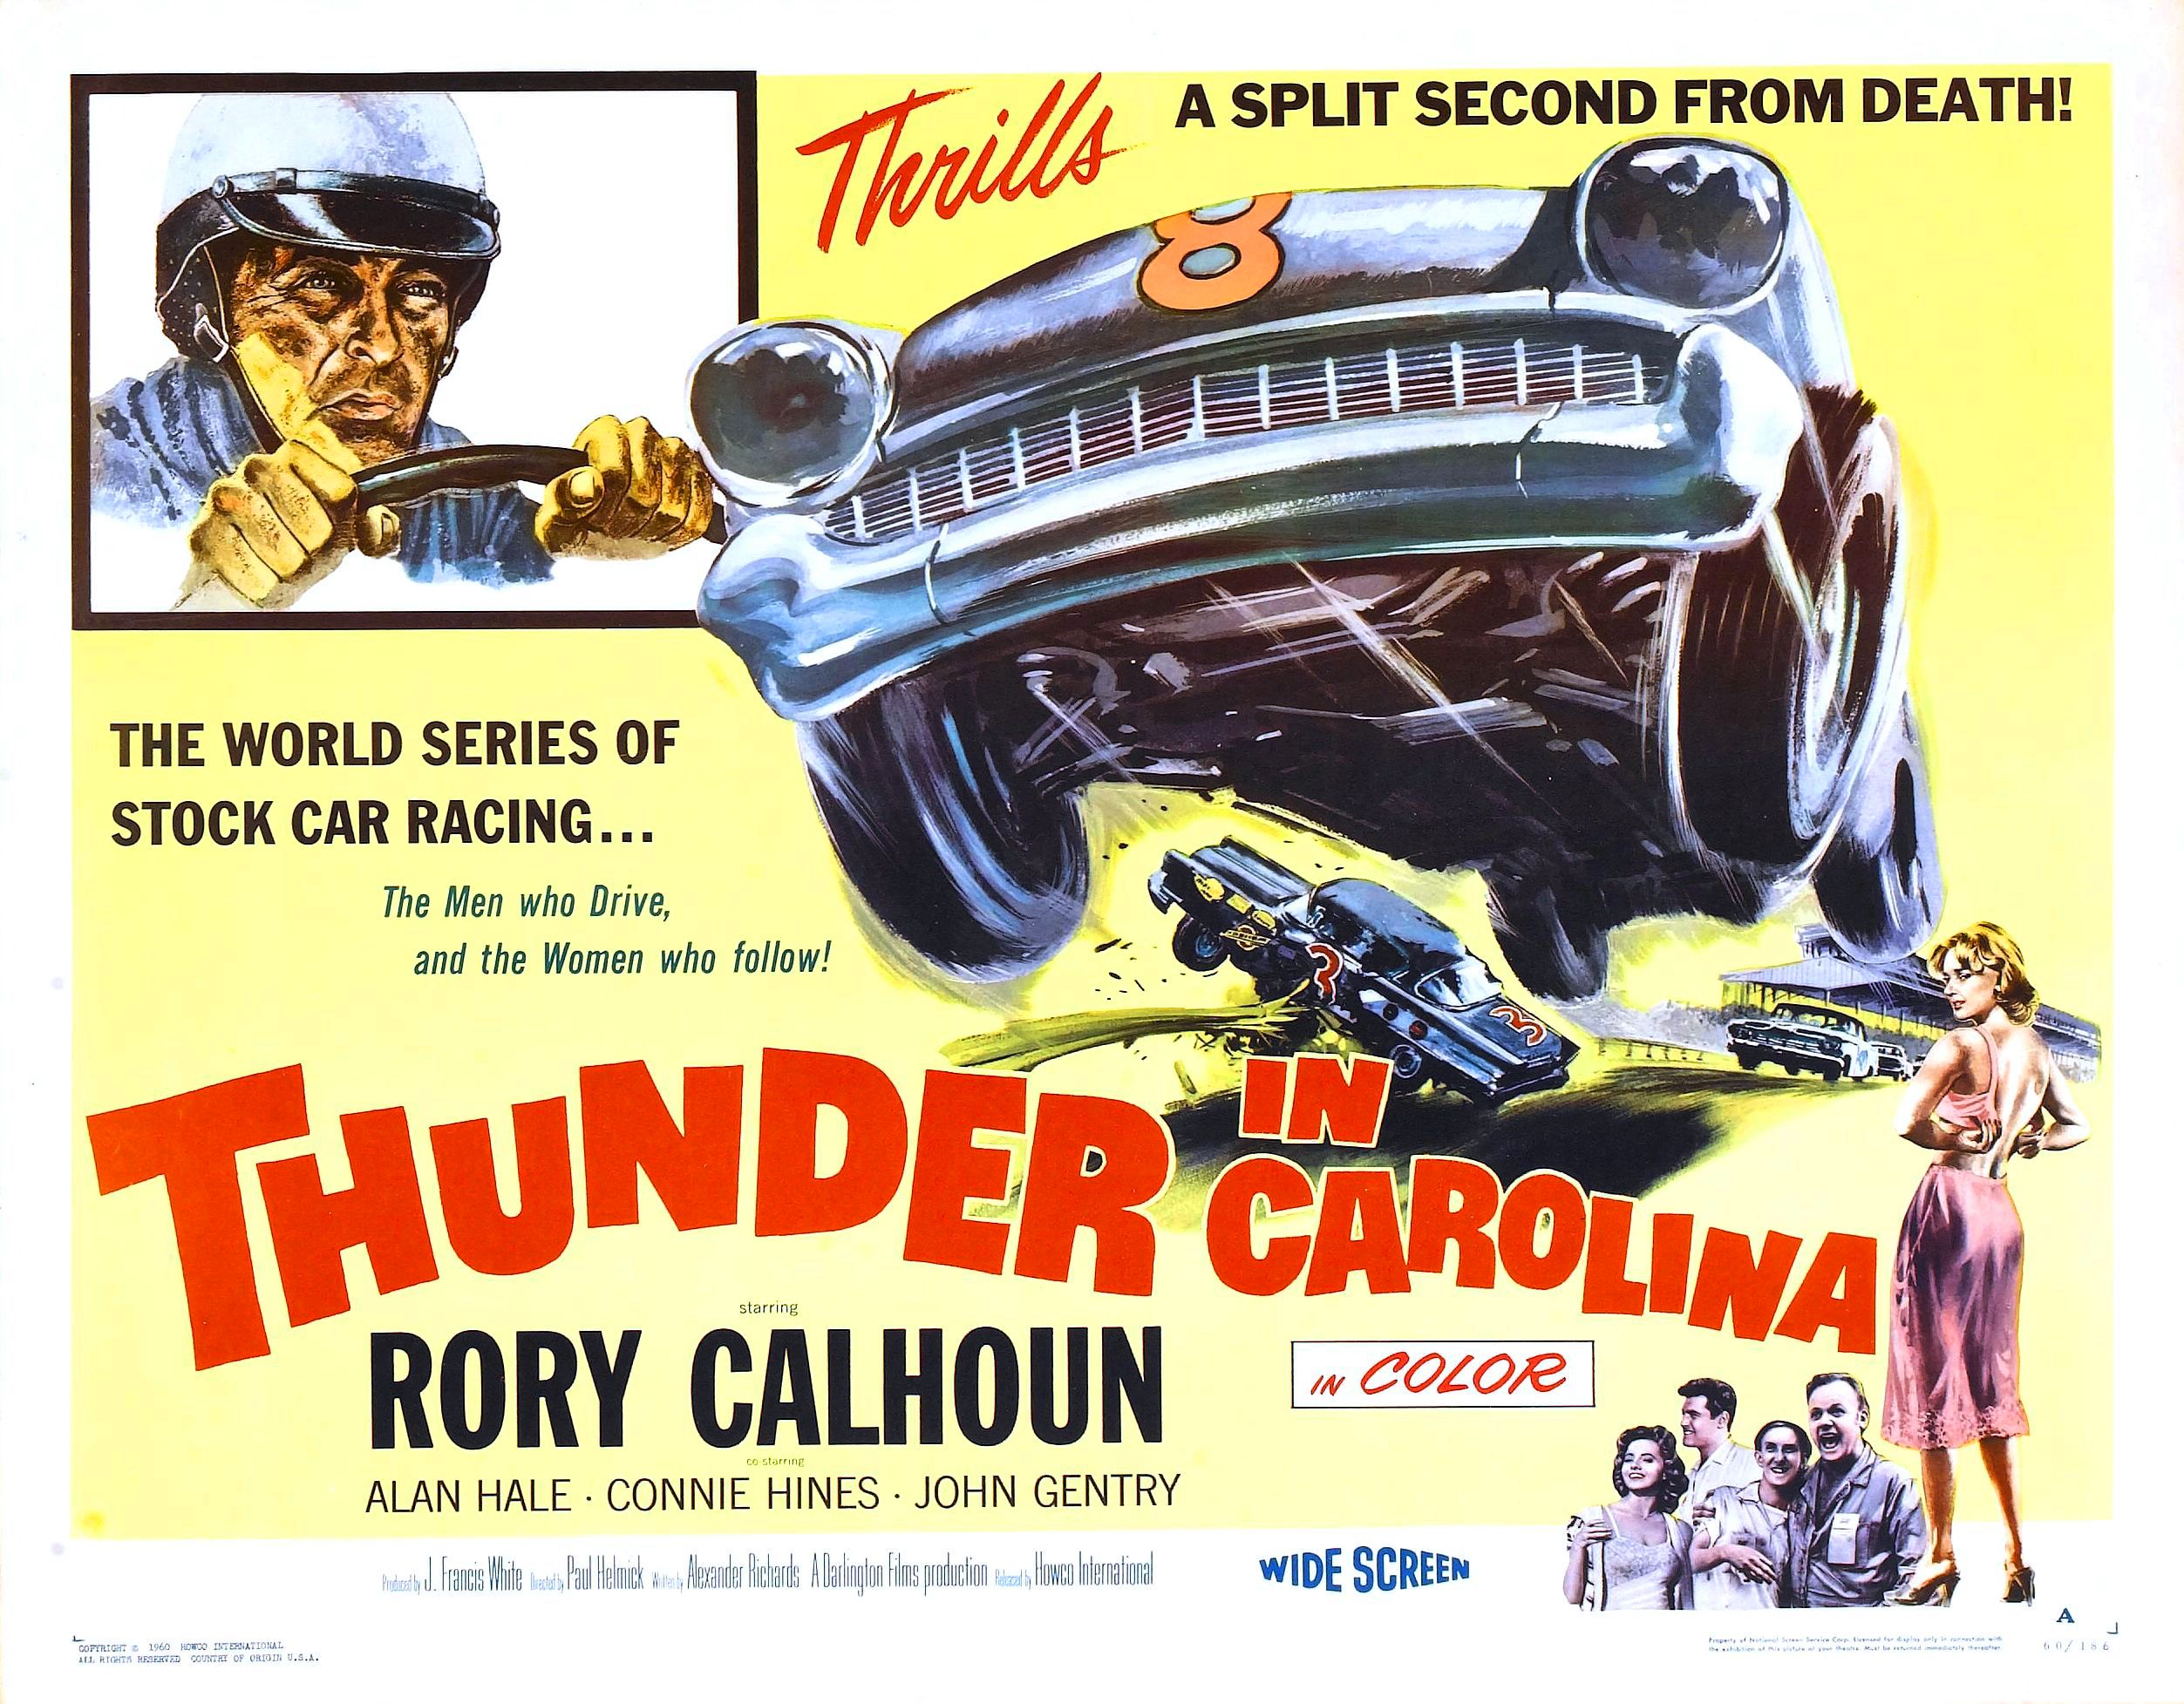 thunder in carolina (1960) - A Split Second From Death! Thrilt A Split The World Series Of Stock Car Racing... The Men who Drive, and the Women who ! Thunder Carolina Rory Calhoun Color Alan Hale. Connie Hines. John Gentry Wide Screen